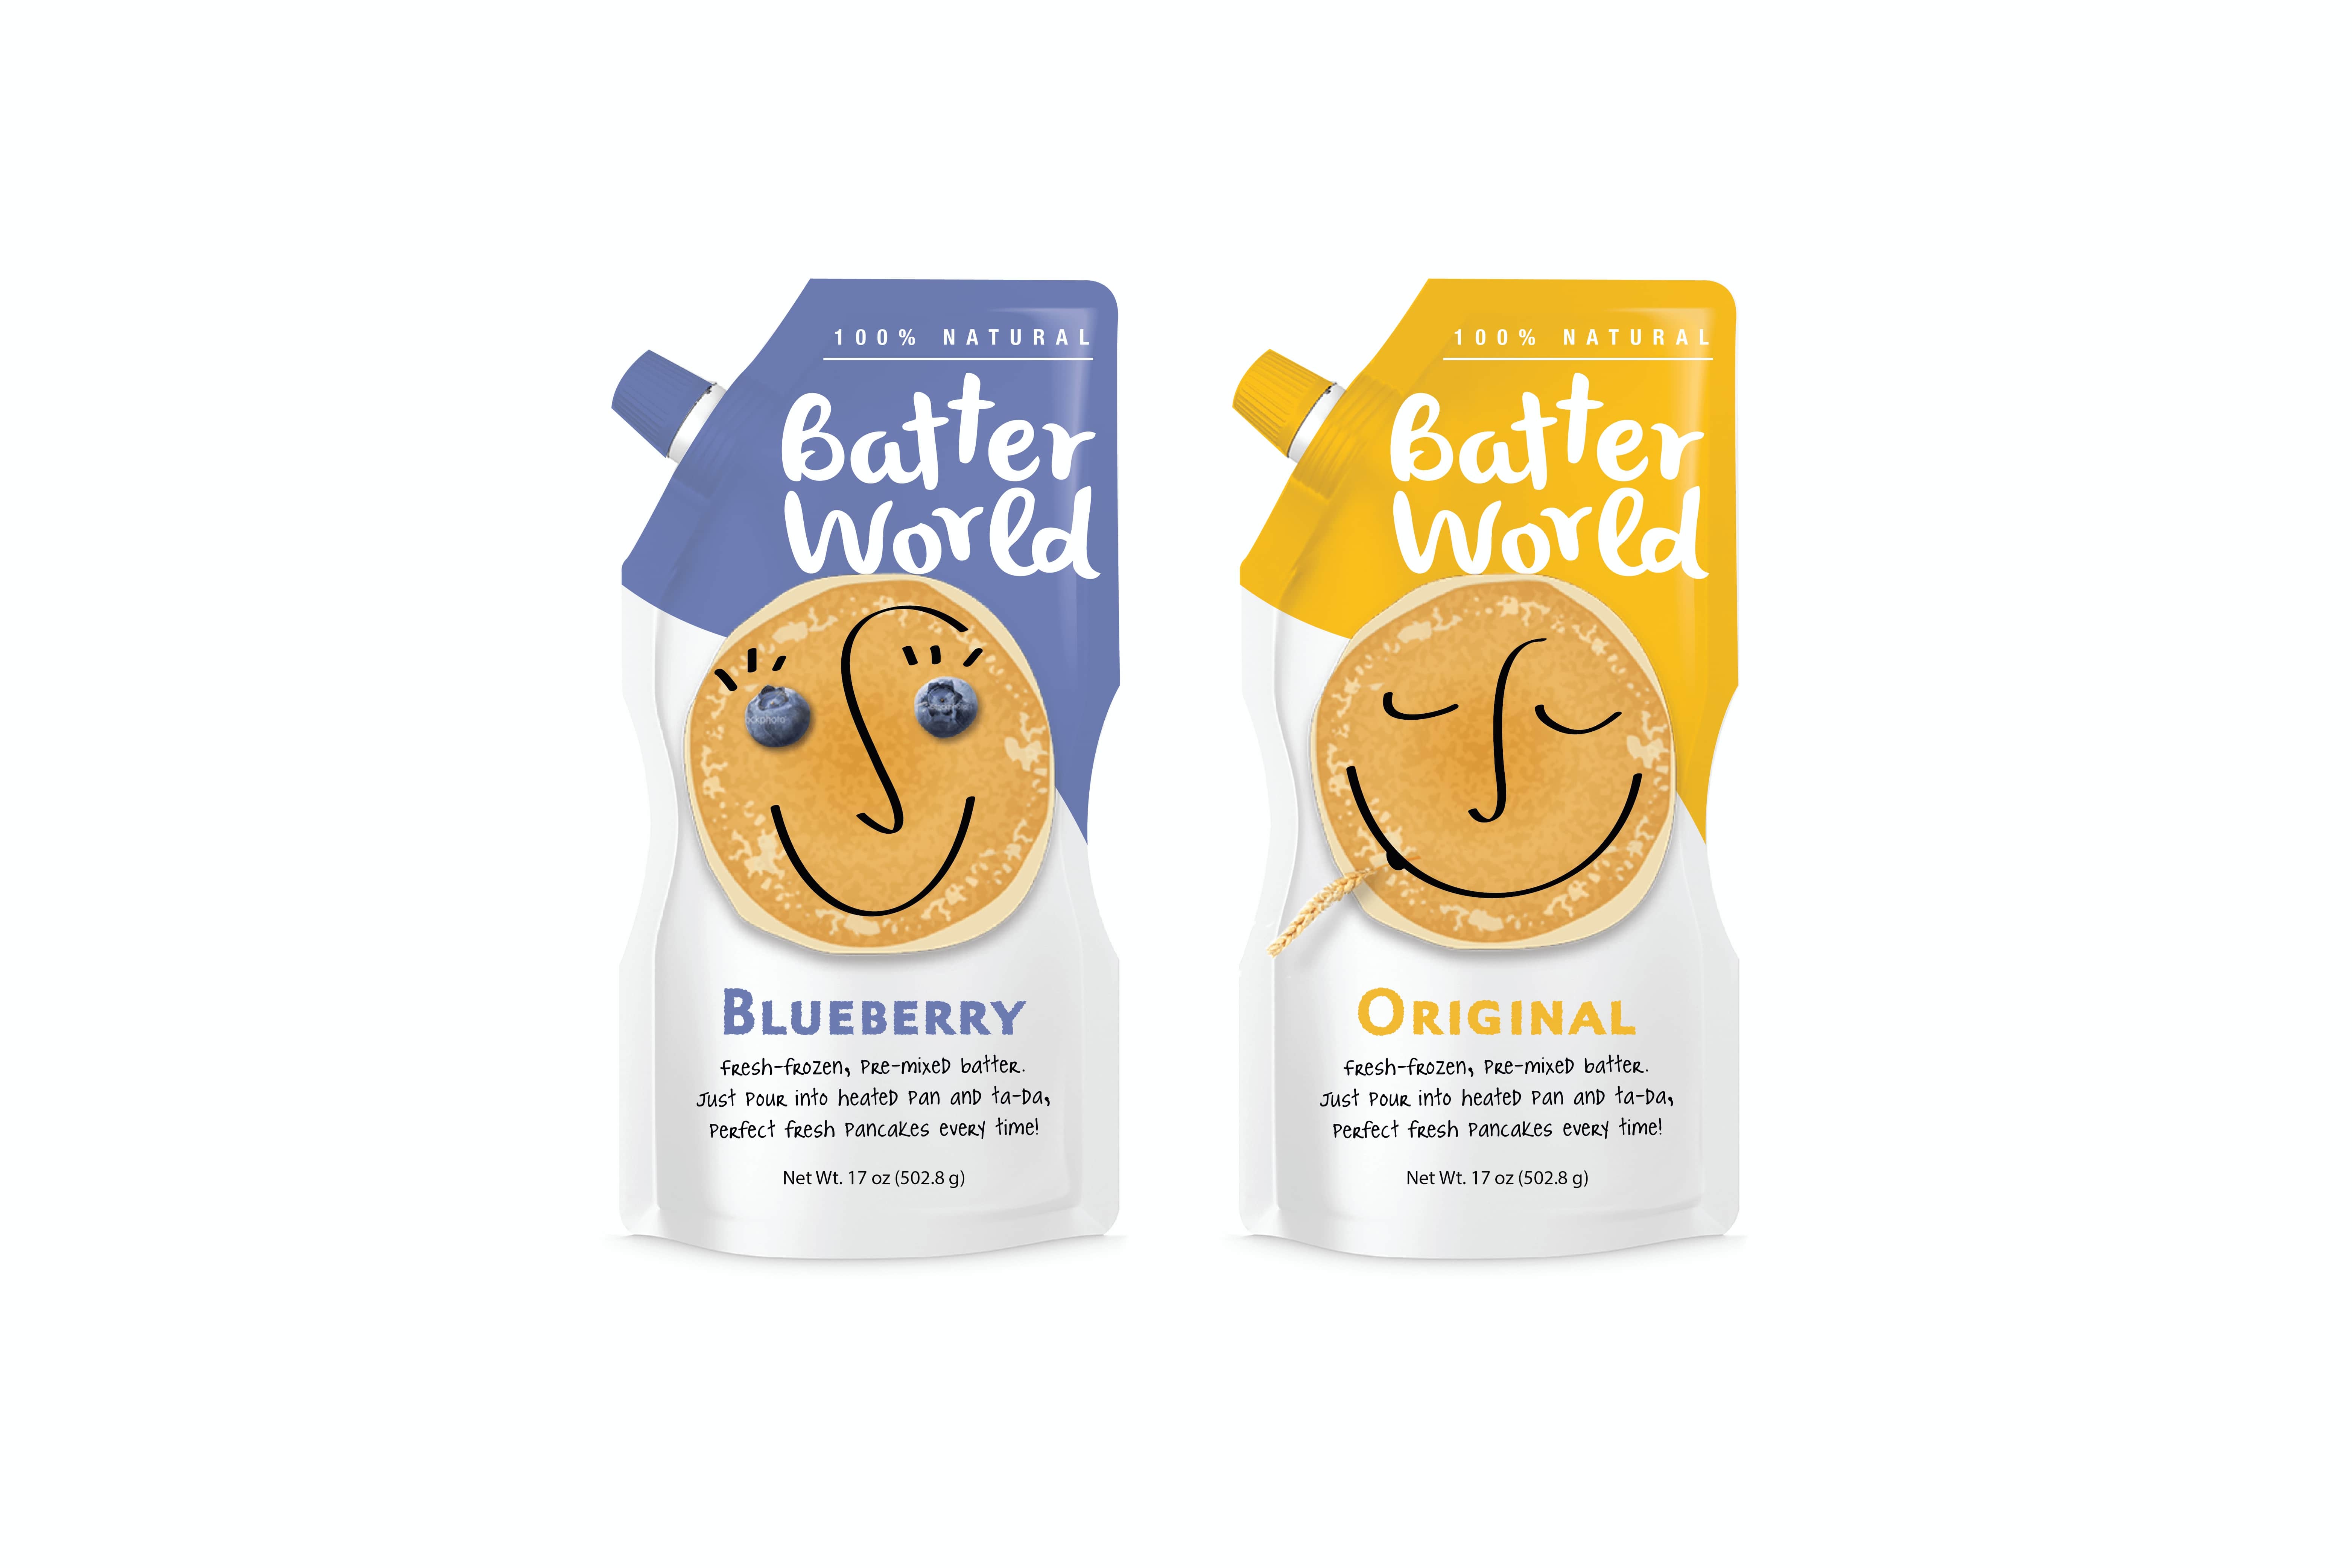 Alternate Batter World packaging design concept with happy faces made on pancakes.